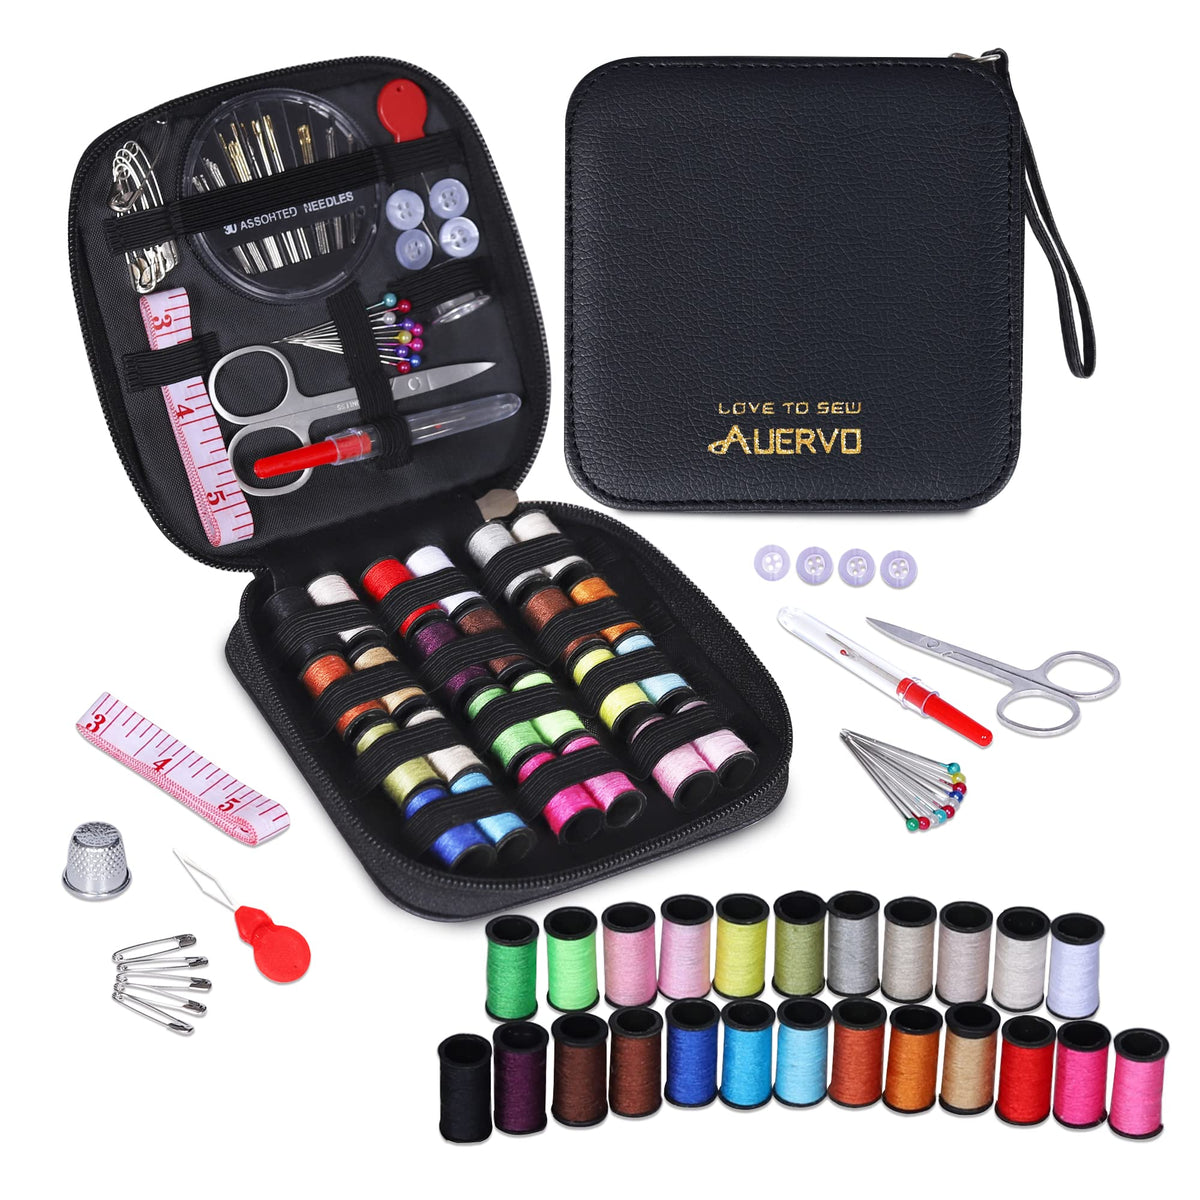 Sewing Kit, AUERVO Mini Basic Sewing Kits with Leather Case Thread and Needles Set for Adults, DIY,Home, Travel & Emergency with Zipper Compact Small Waterproof Durable Black